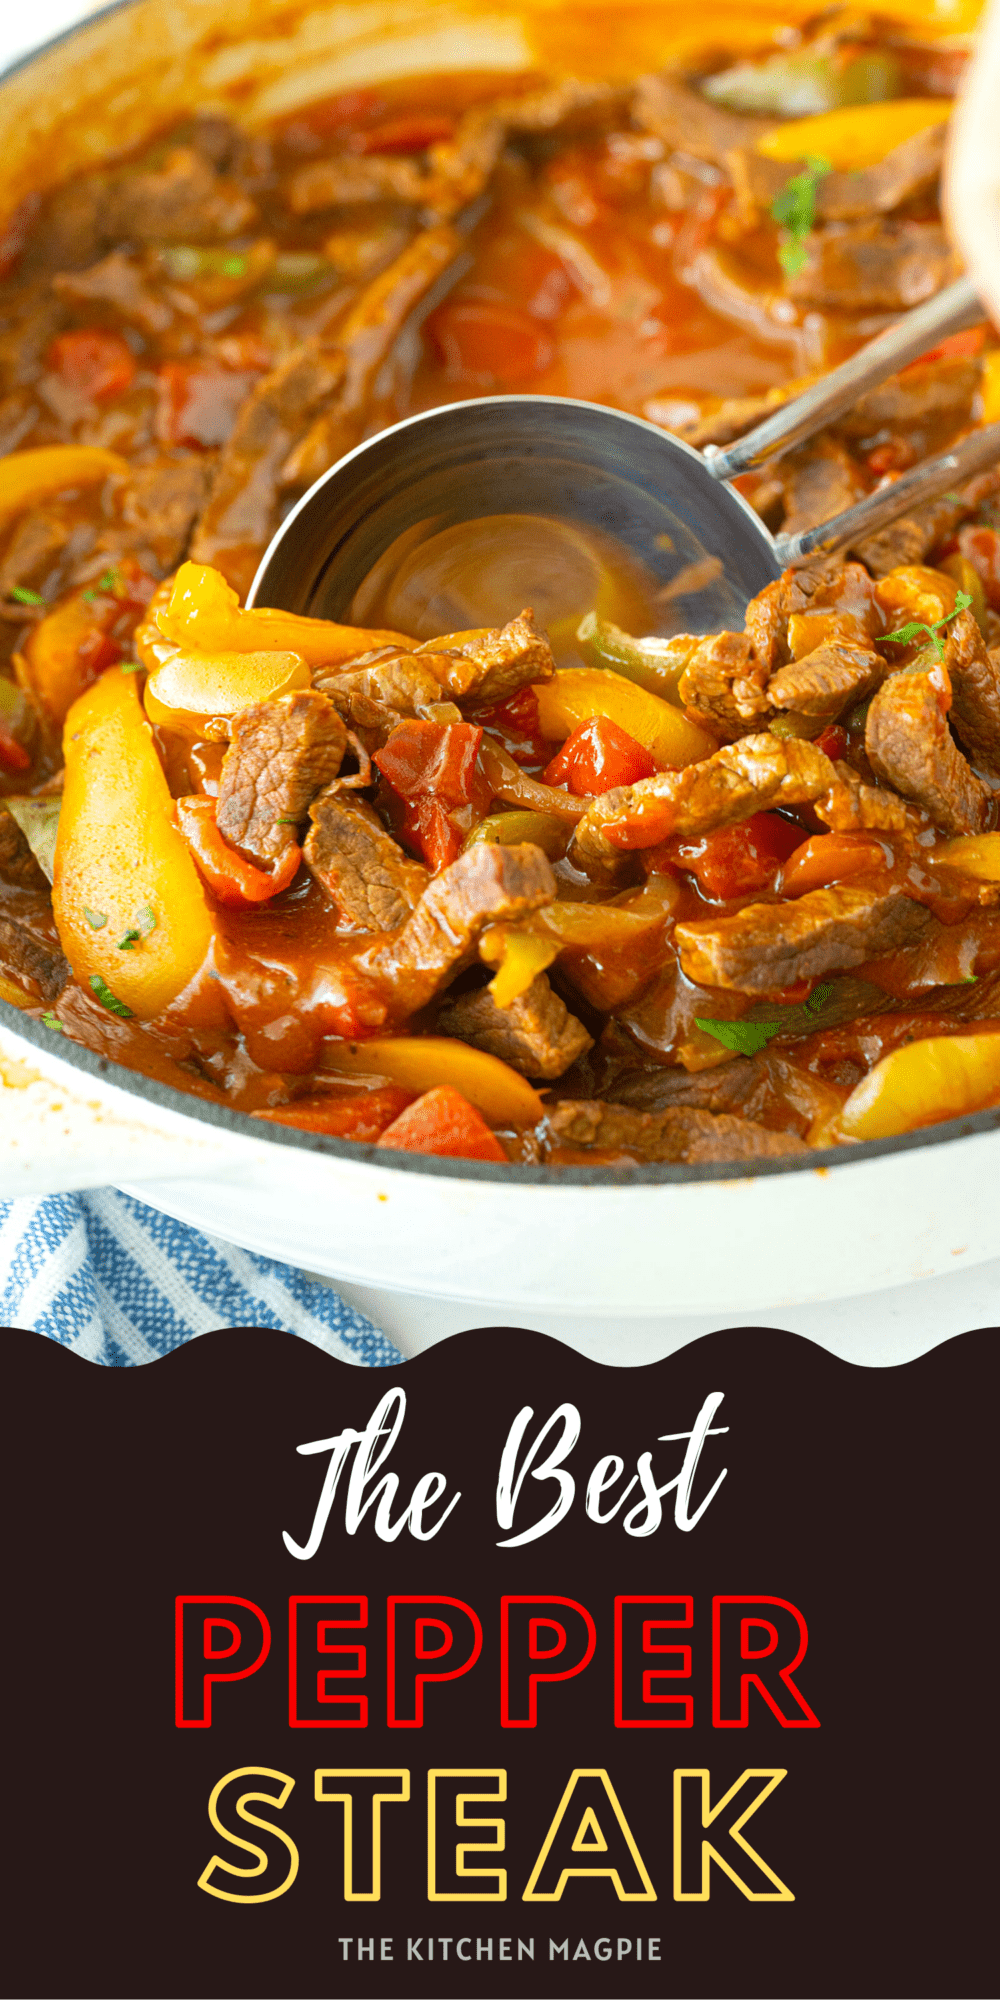 This pepper steak recipe is loaded with tender beef, green and yellow peppers in a delicious tomato gravy that is best served over rice or egg noodles.